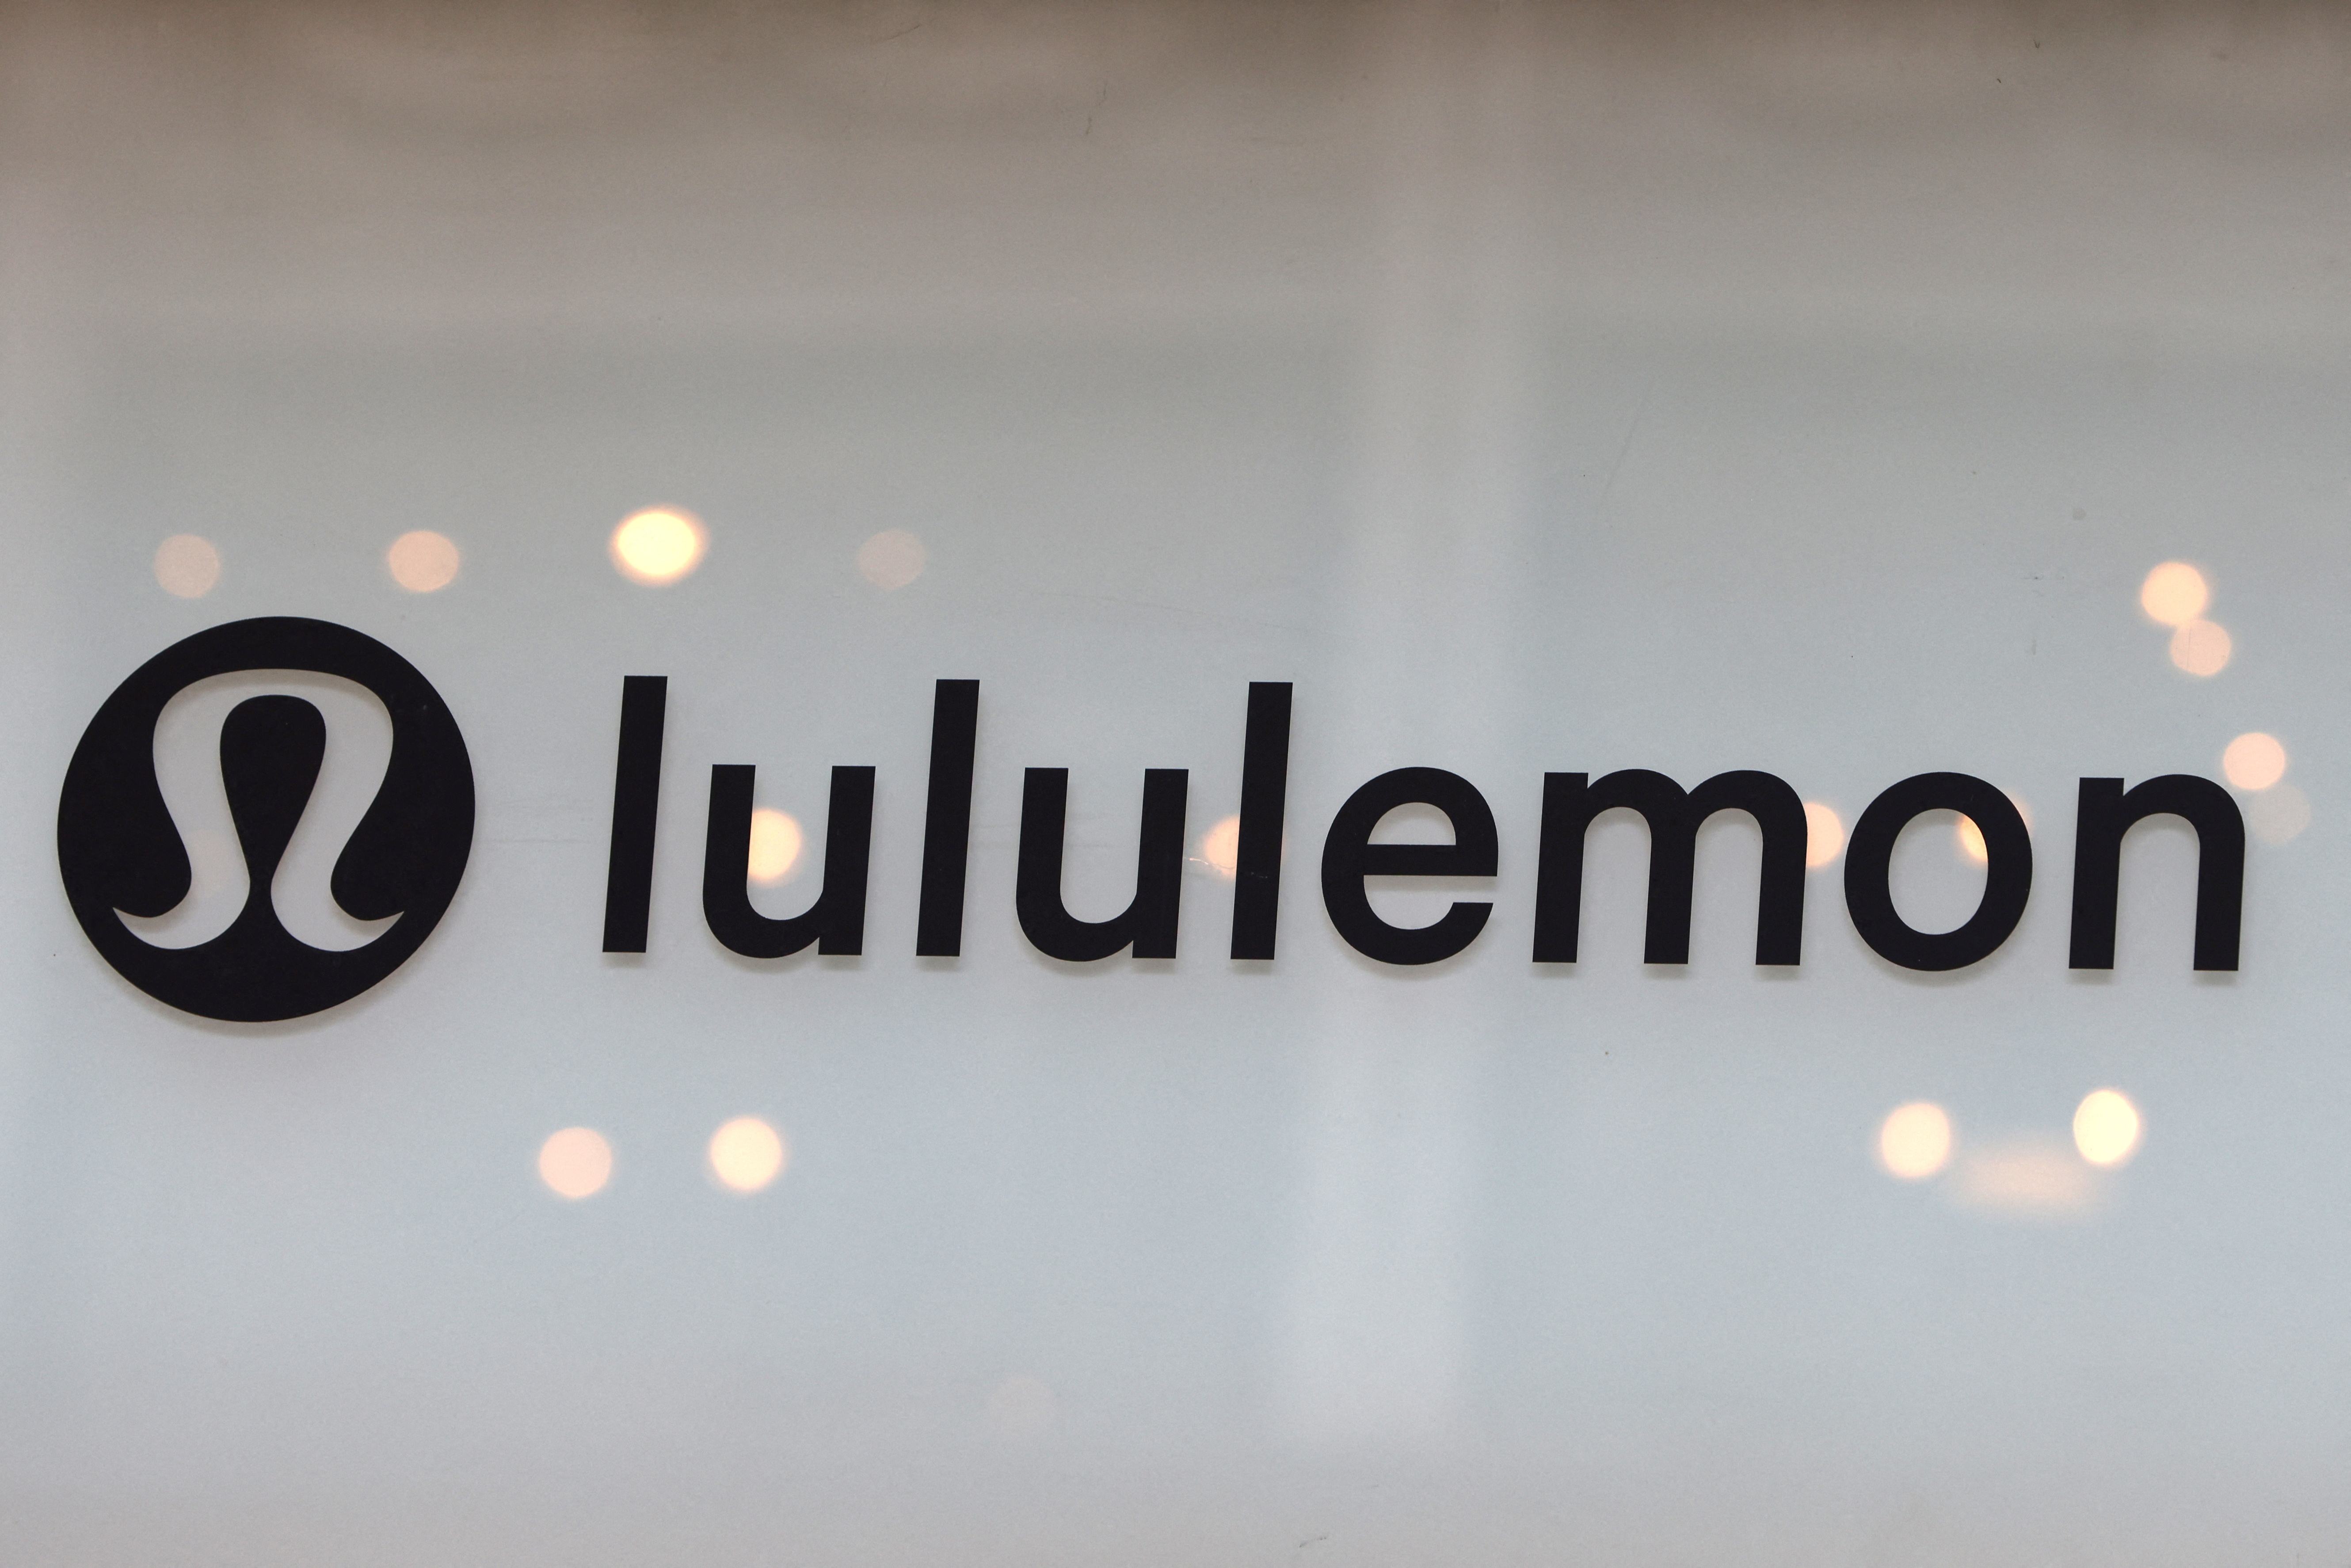 Lululemon raises full-year forecasts, unaffected by inflation, China curbs